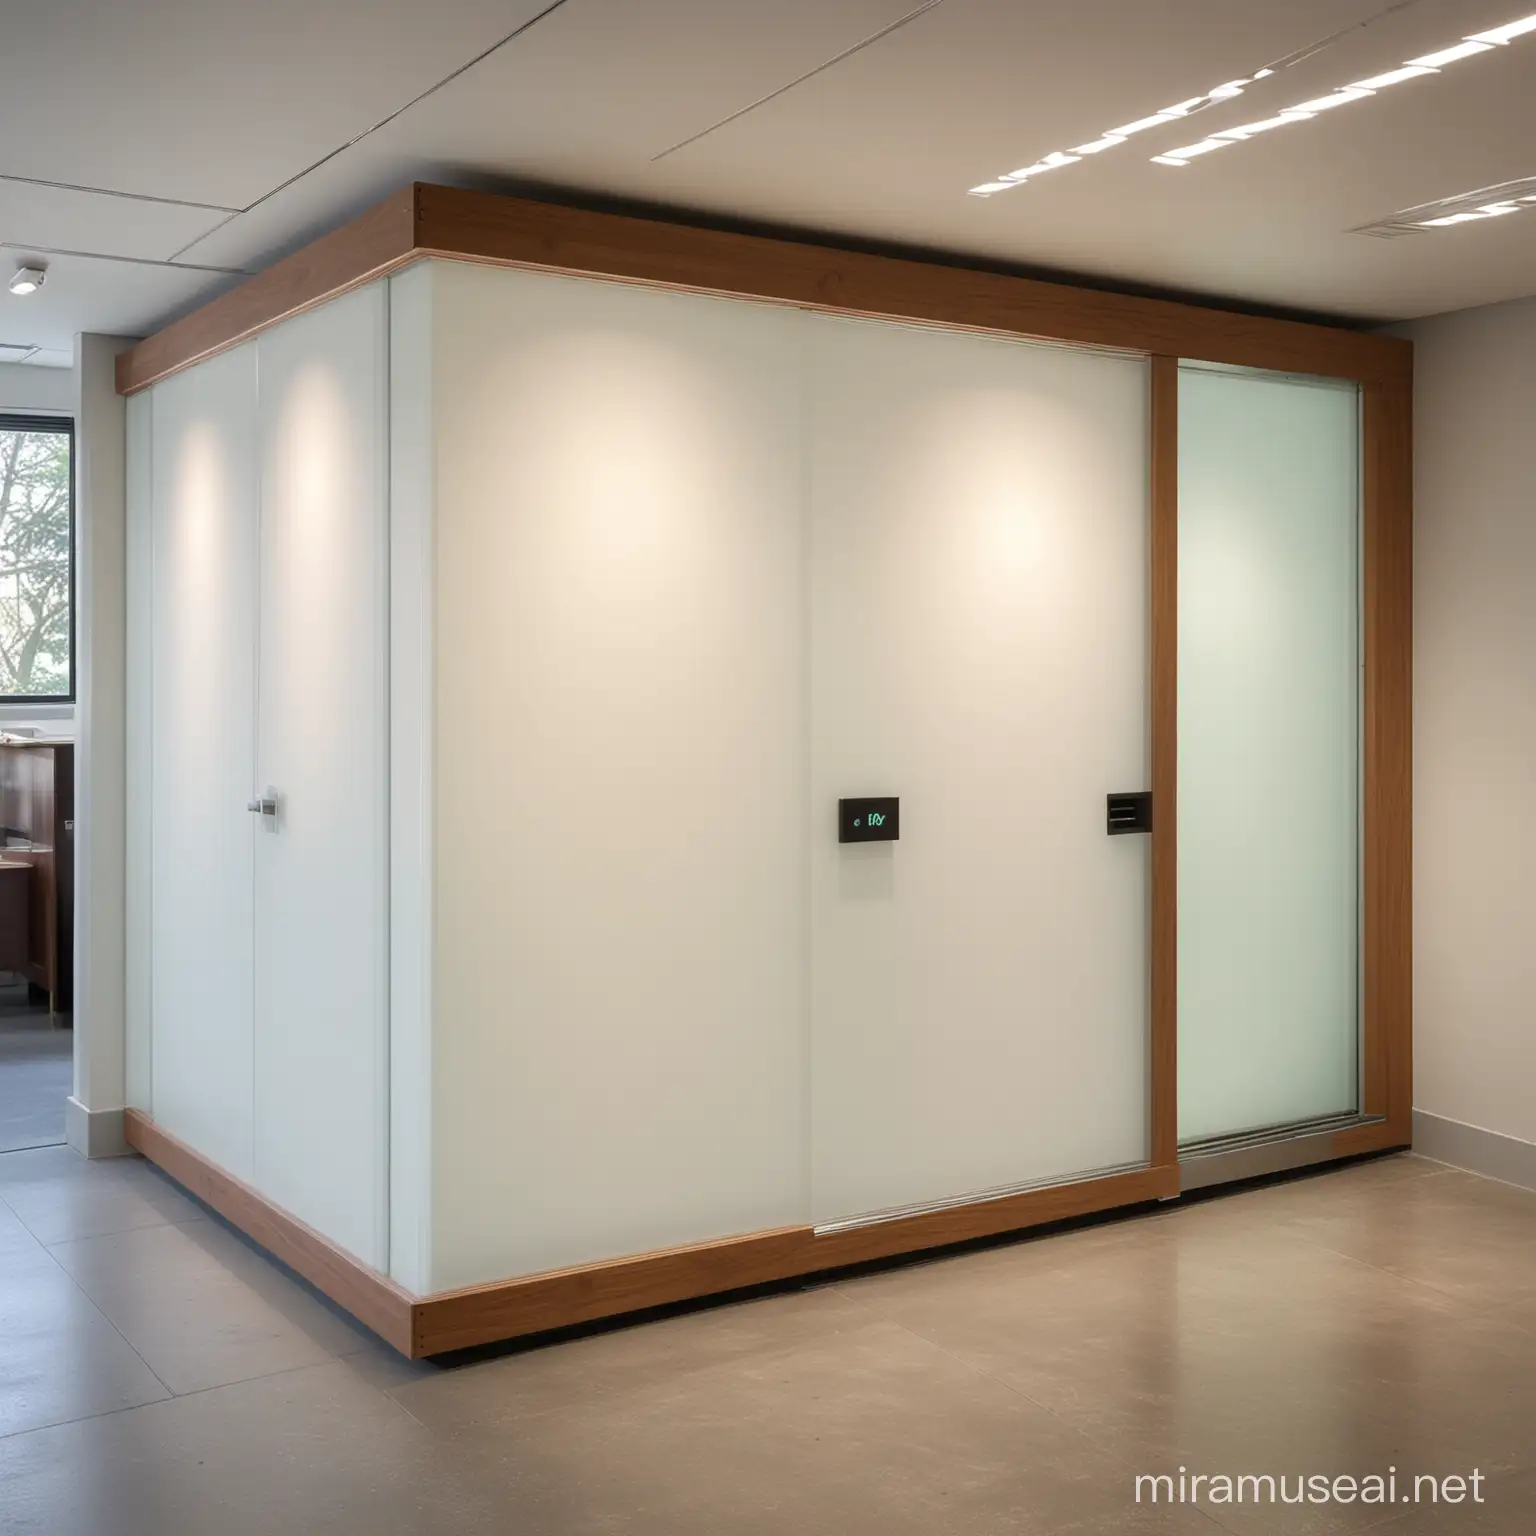 A nap box for employees with a 3x3 floor plane, Soundproofed, an entrance with glass sliding door, in a Mid-Century design style, lighted by led panels and a Touchscreen control panel. Frosted glass walls.